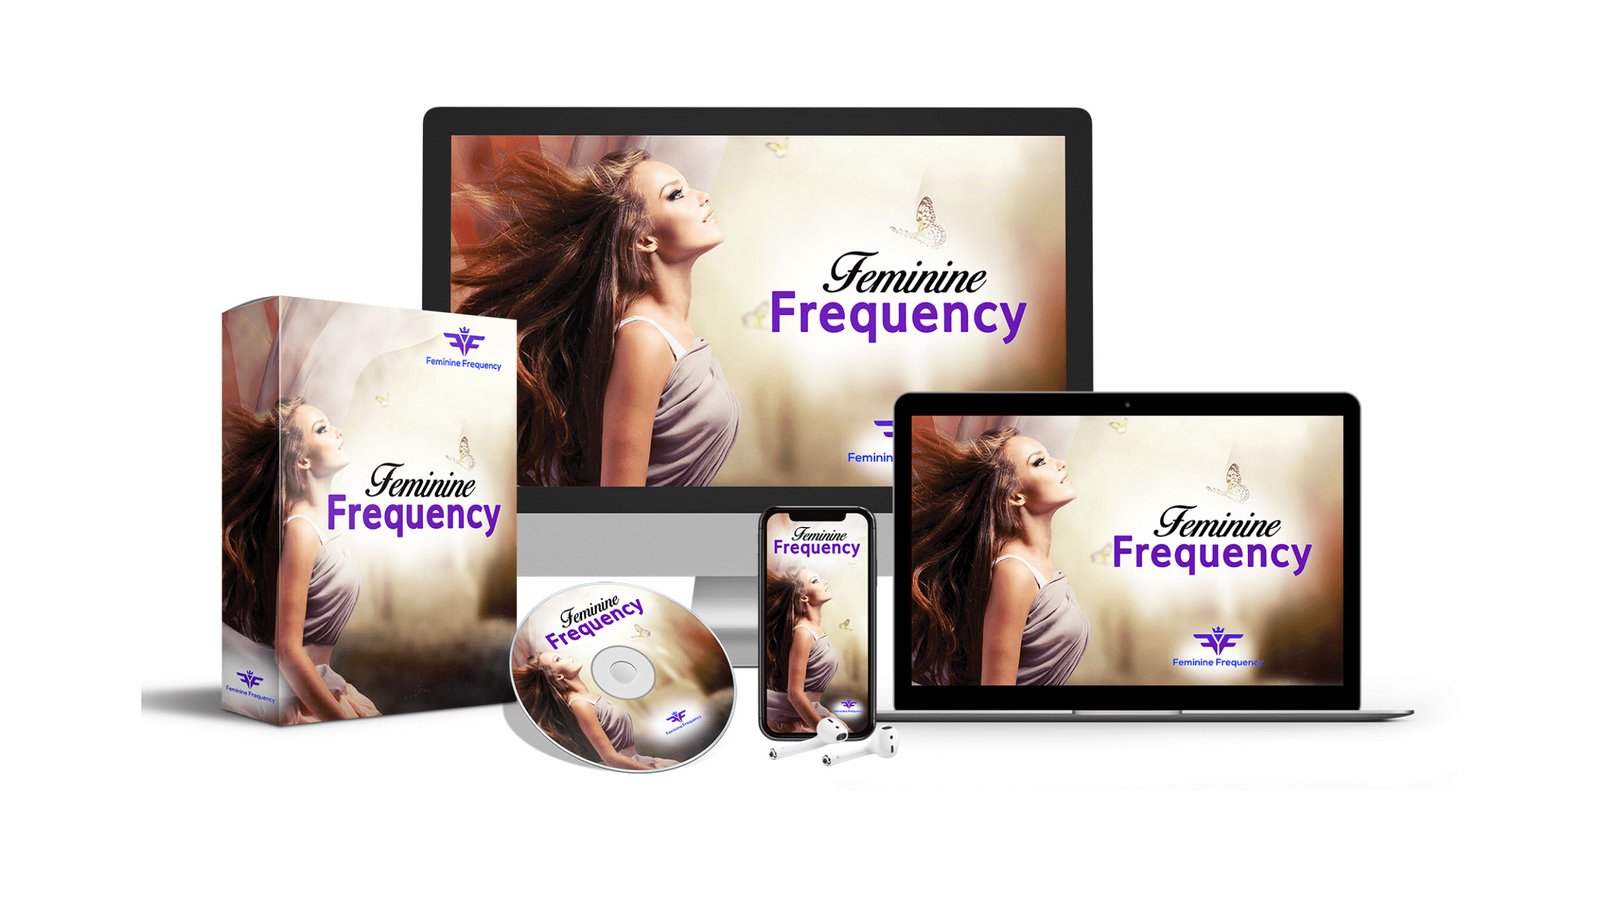 Feminine Frequency Reviews